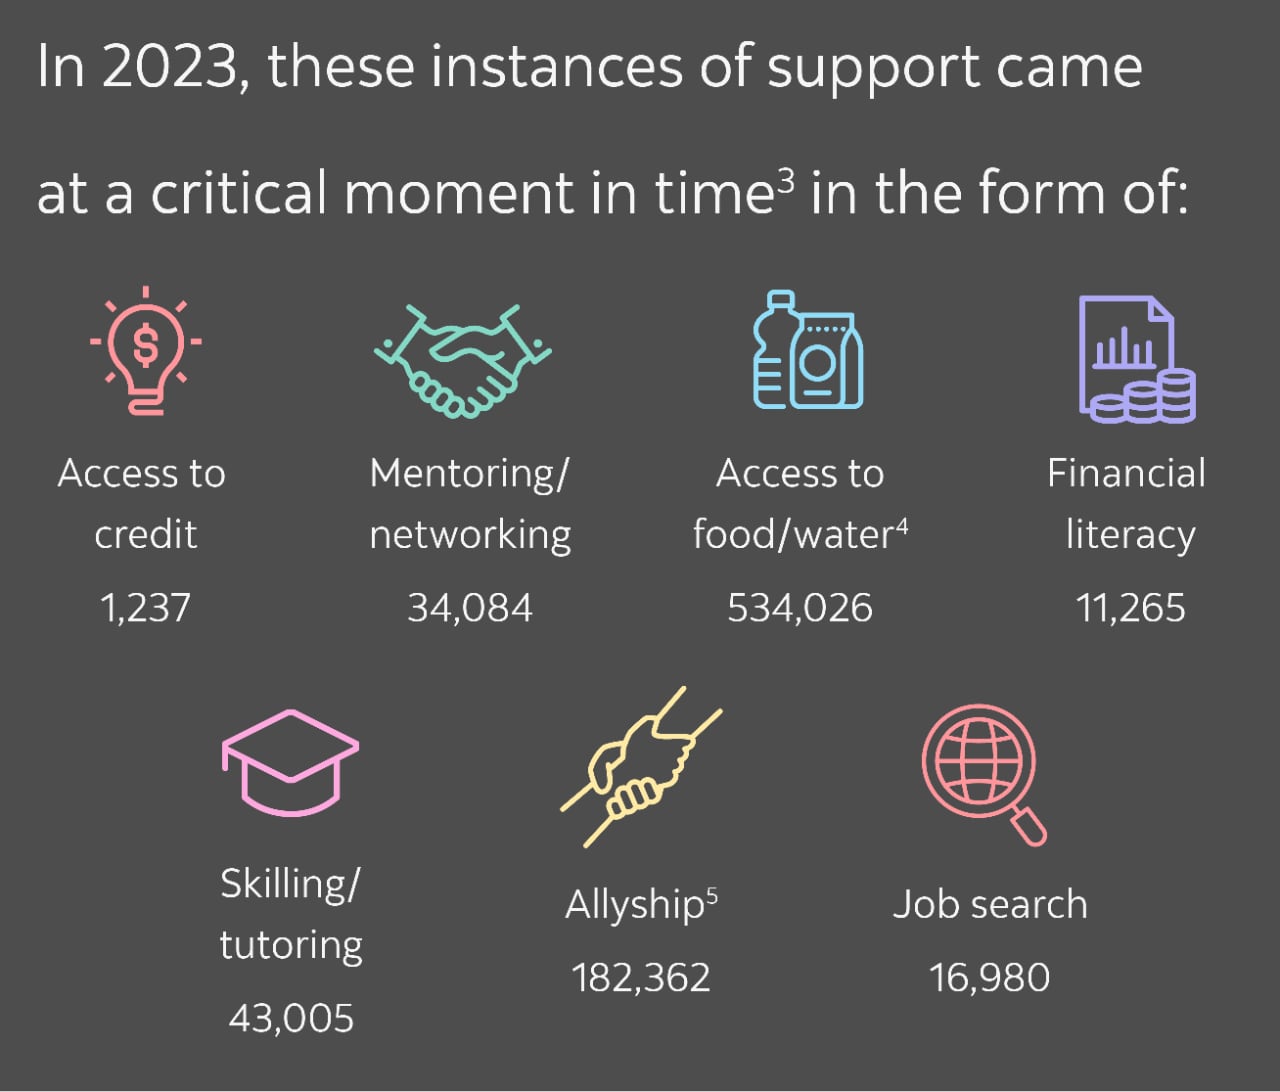 Infographic: In 2023, ScotiaRISE funding (to charitable partners) helped deliver support at a  critical moment in time3 in the form of: Access to credit 1,237; Mentoring/networking 34,084; Access to food/water 534,026; Financial literacy 11,265; Skilling/tutoring 43,005; Allyship 182,362; Job search 16,980